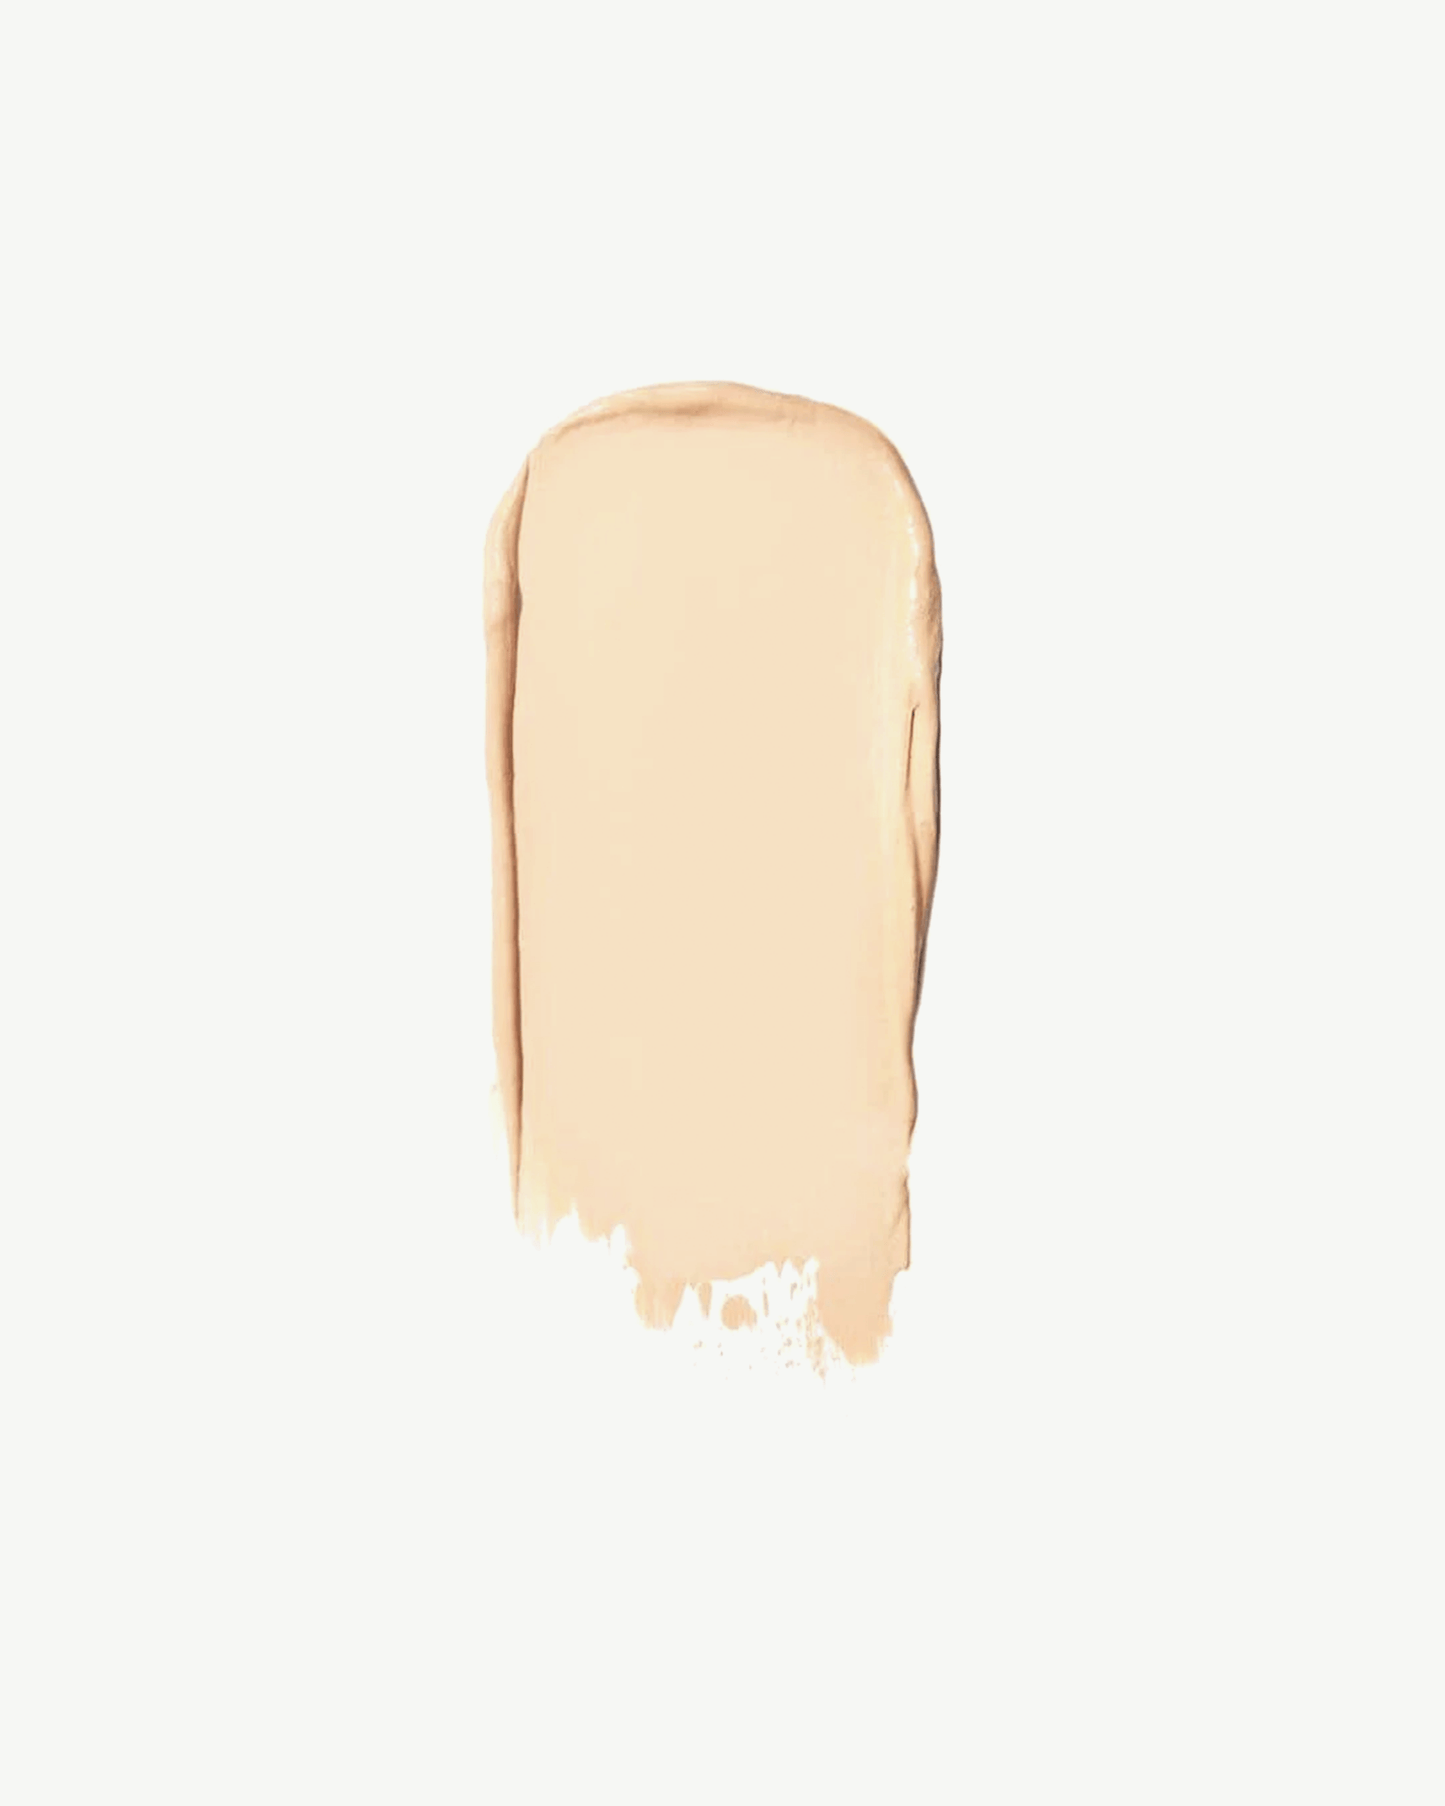 Shade 00 (for fair skin with neutral undertones)